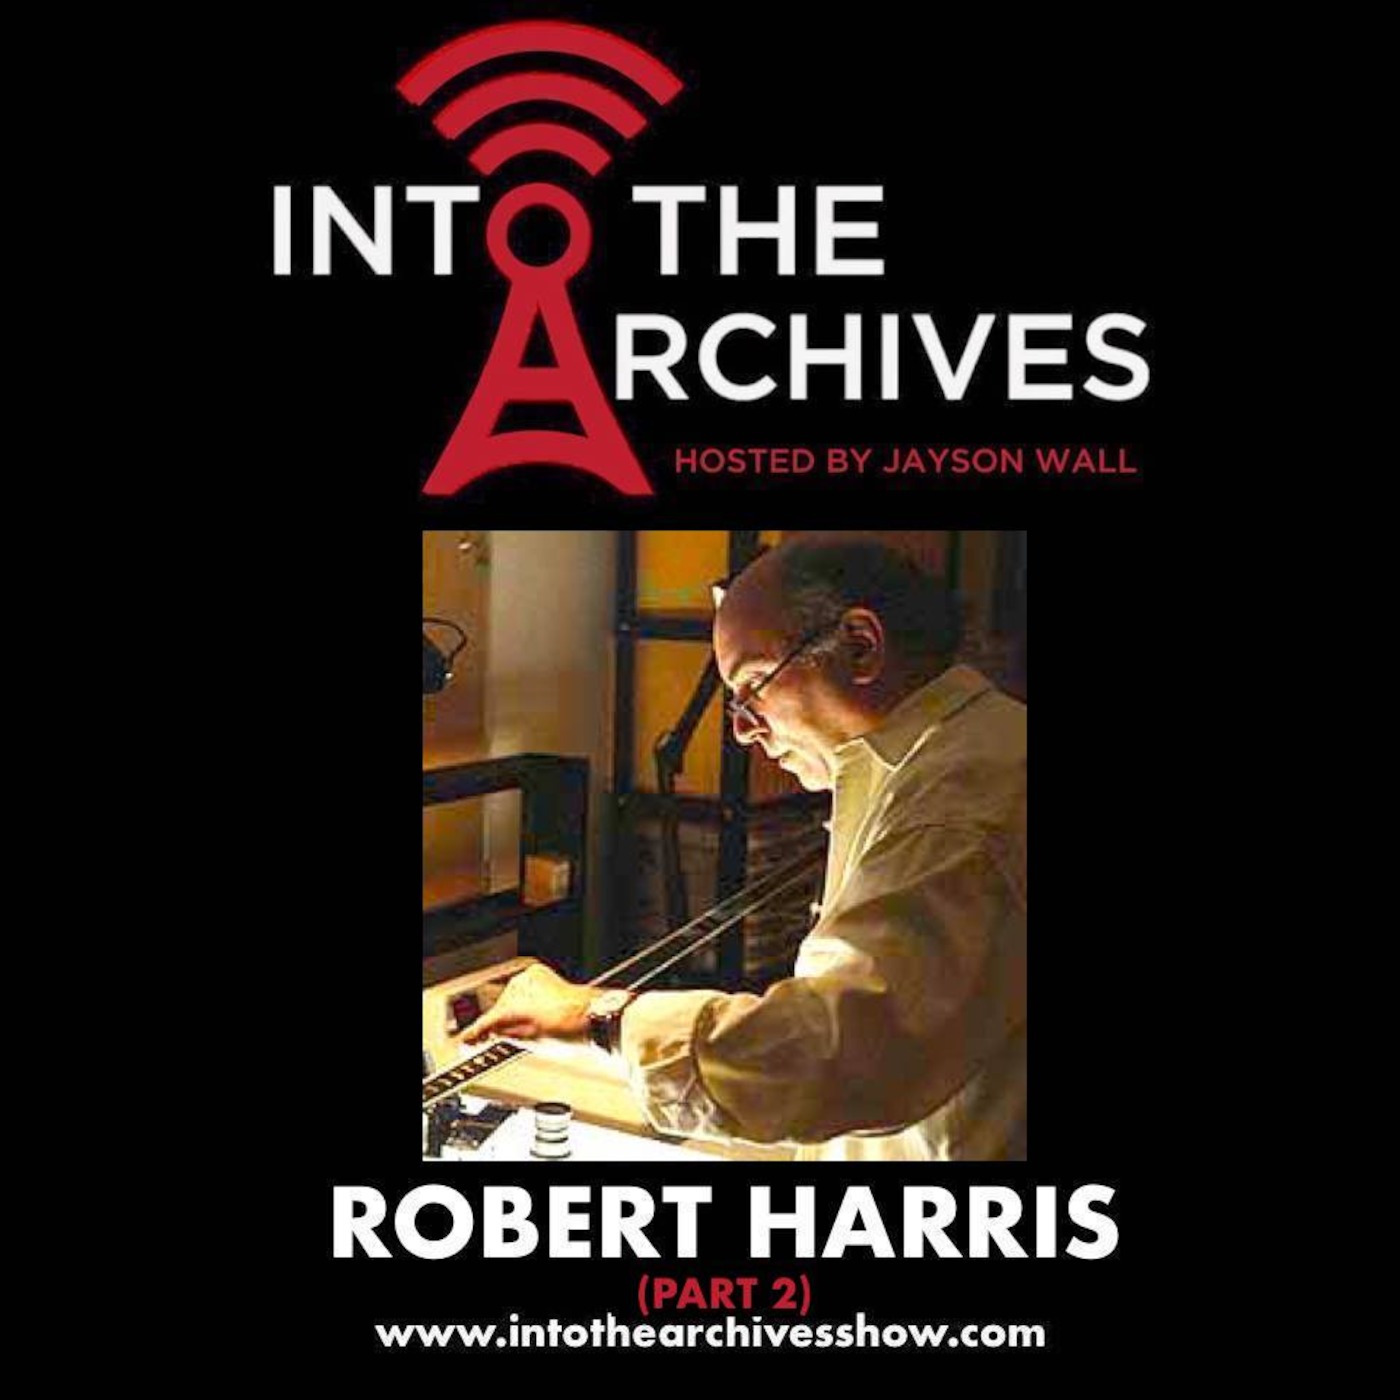 INTO THE ARCHIVES – Show 4 (Robert A. Harris - Part 2 of 2)